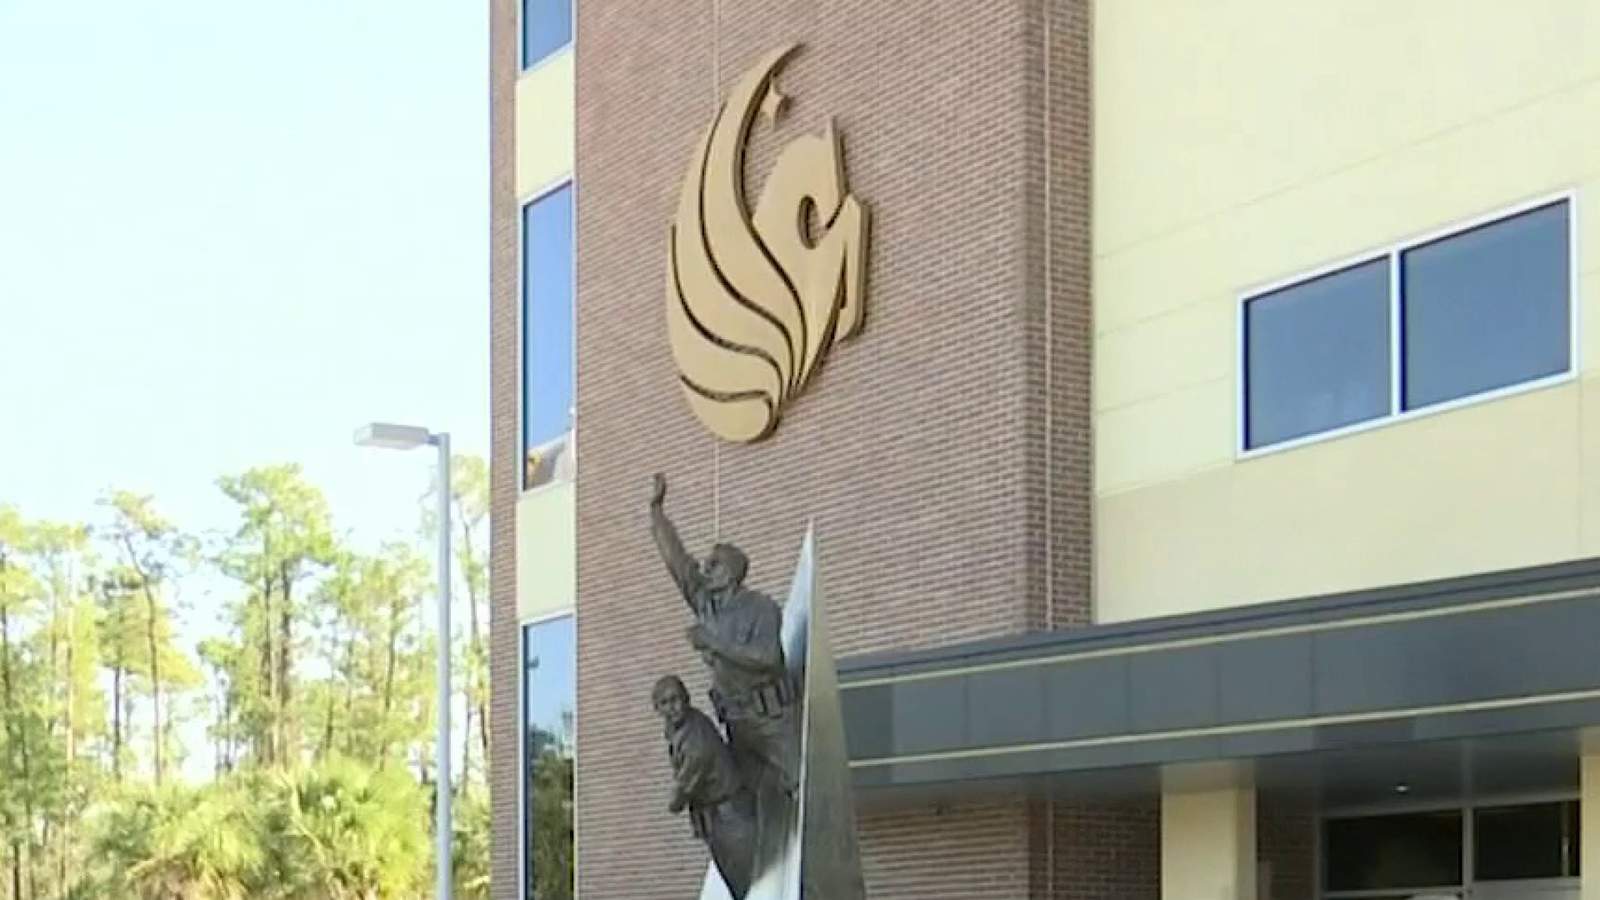 UCF confronts professors racist comments after calls for his removal mount